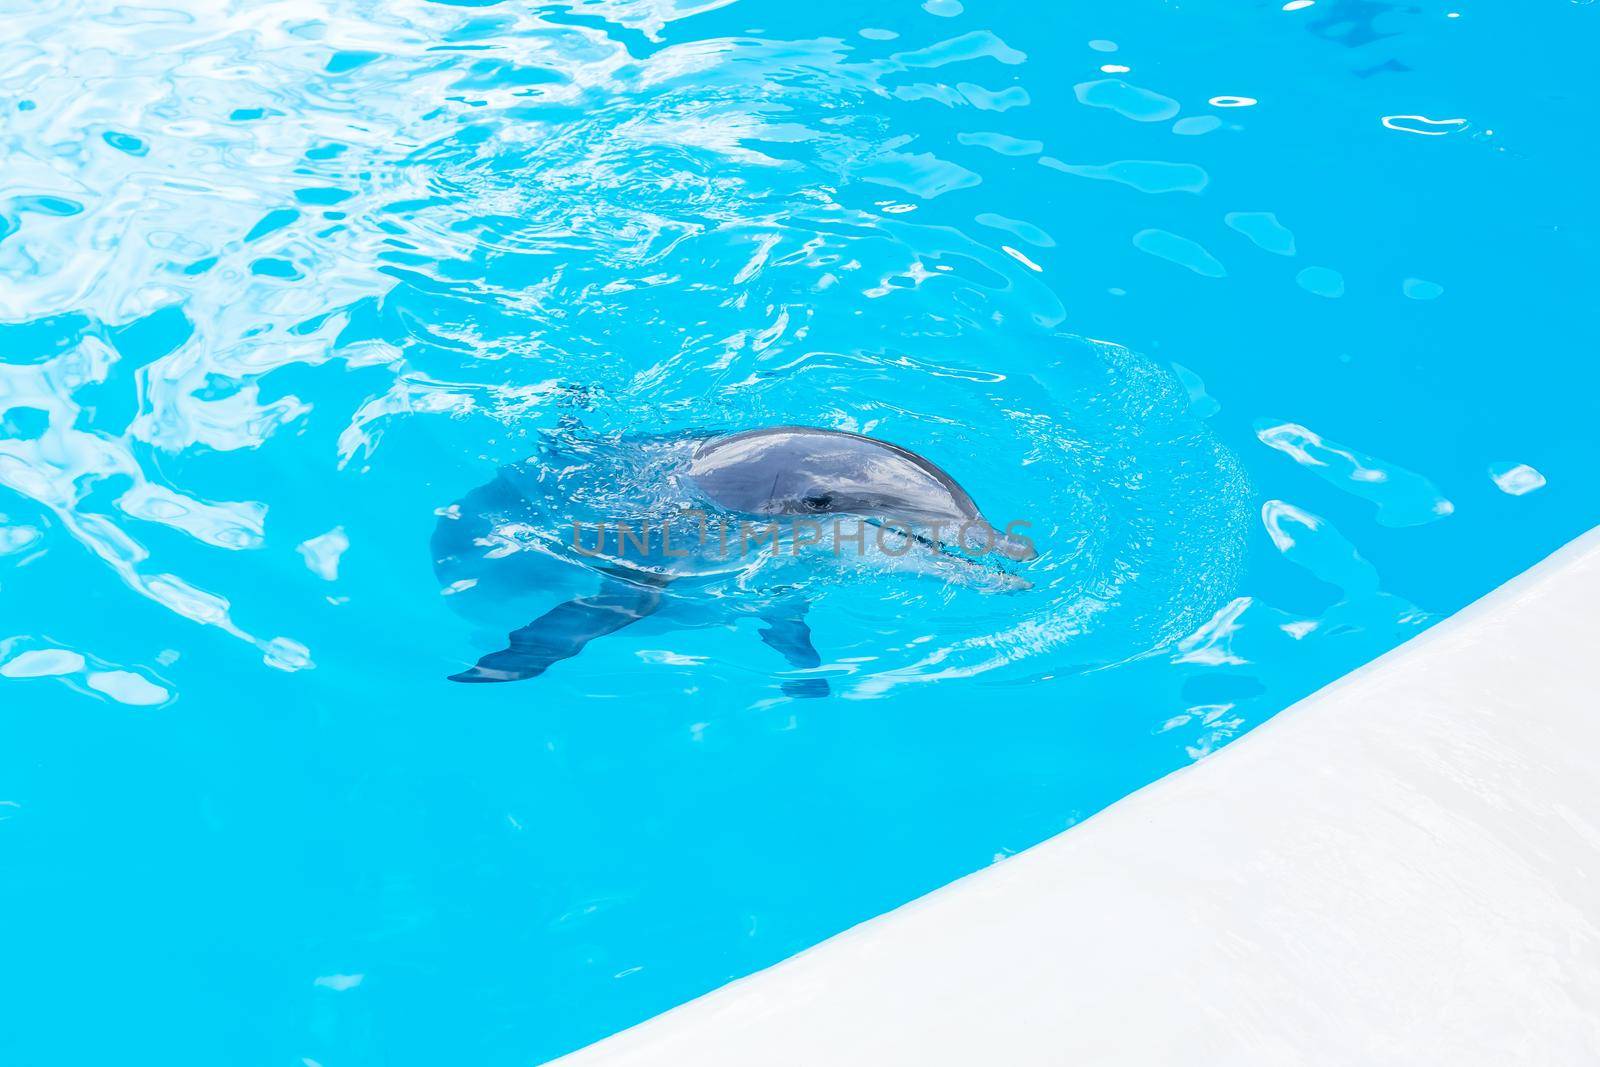 dolphins swim in the pool, show.